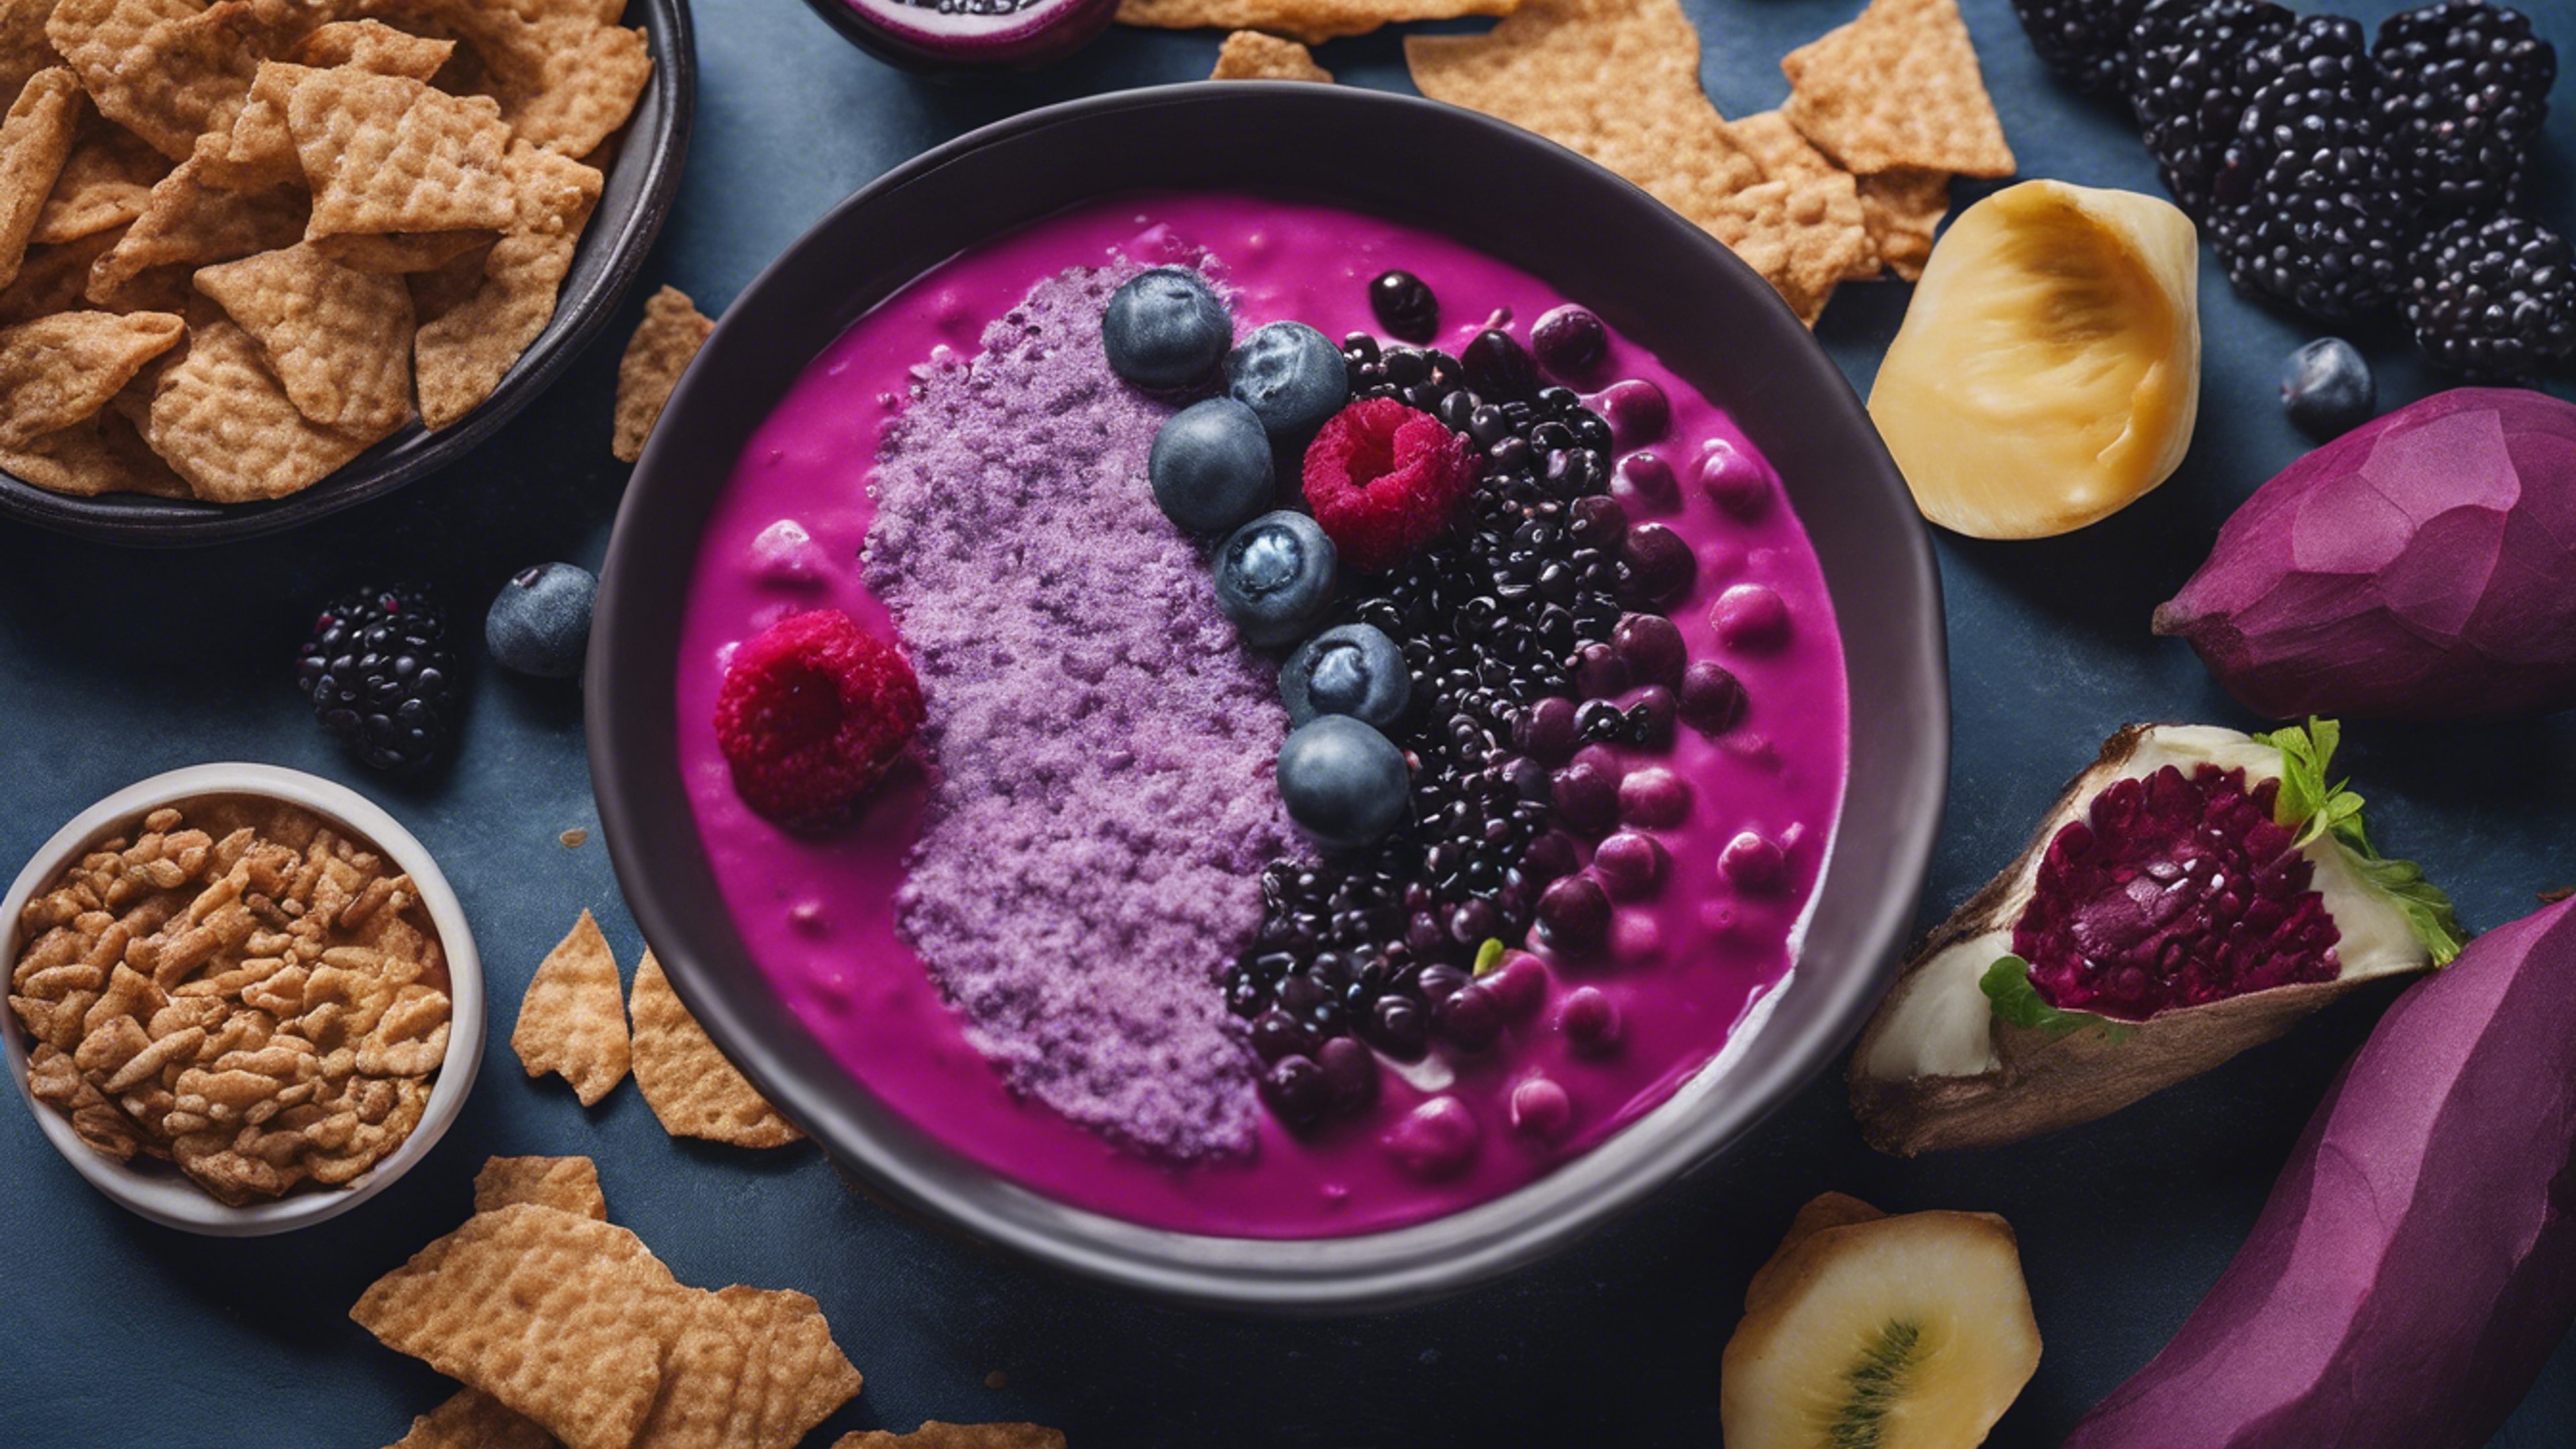 An eye-catching food collage, with purple foods like acai bowls, blue corn chips, and beetroot soup. טפט[72264552455b47748fee]